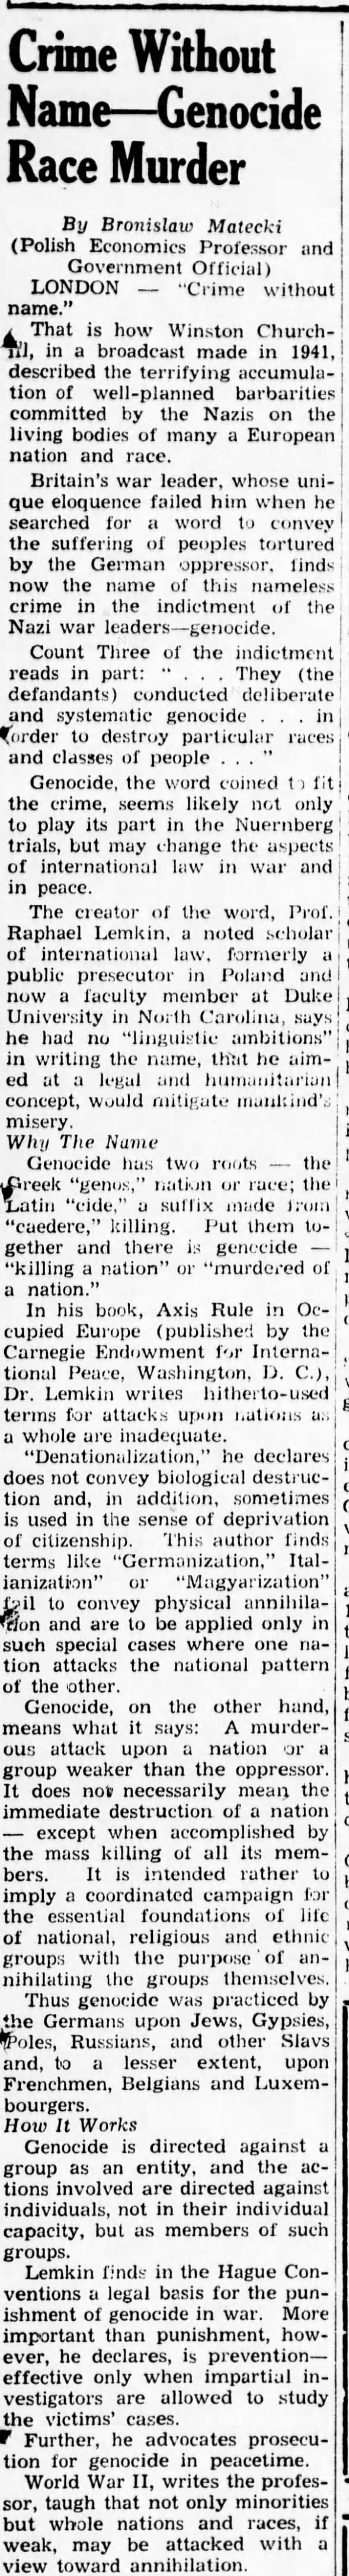 Crime Without Name—Genocide Race Murder